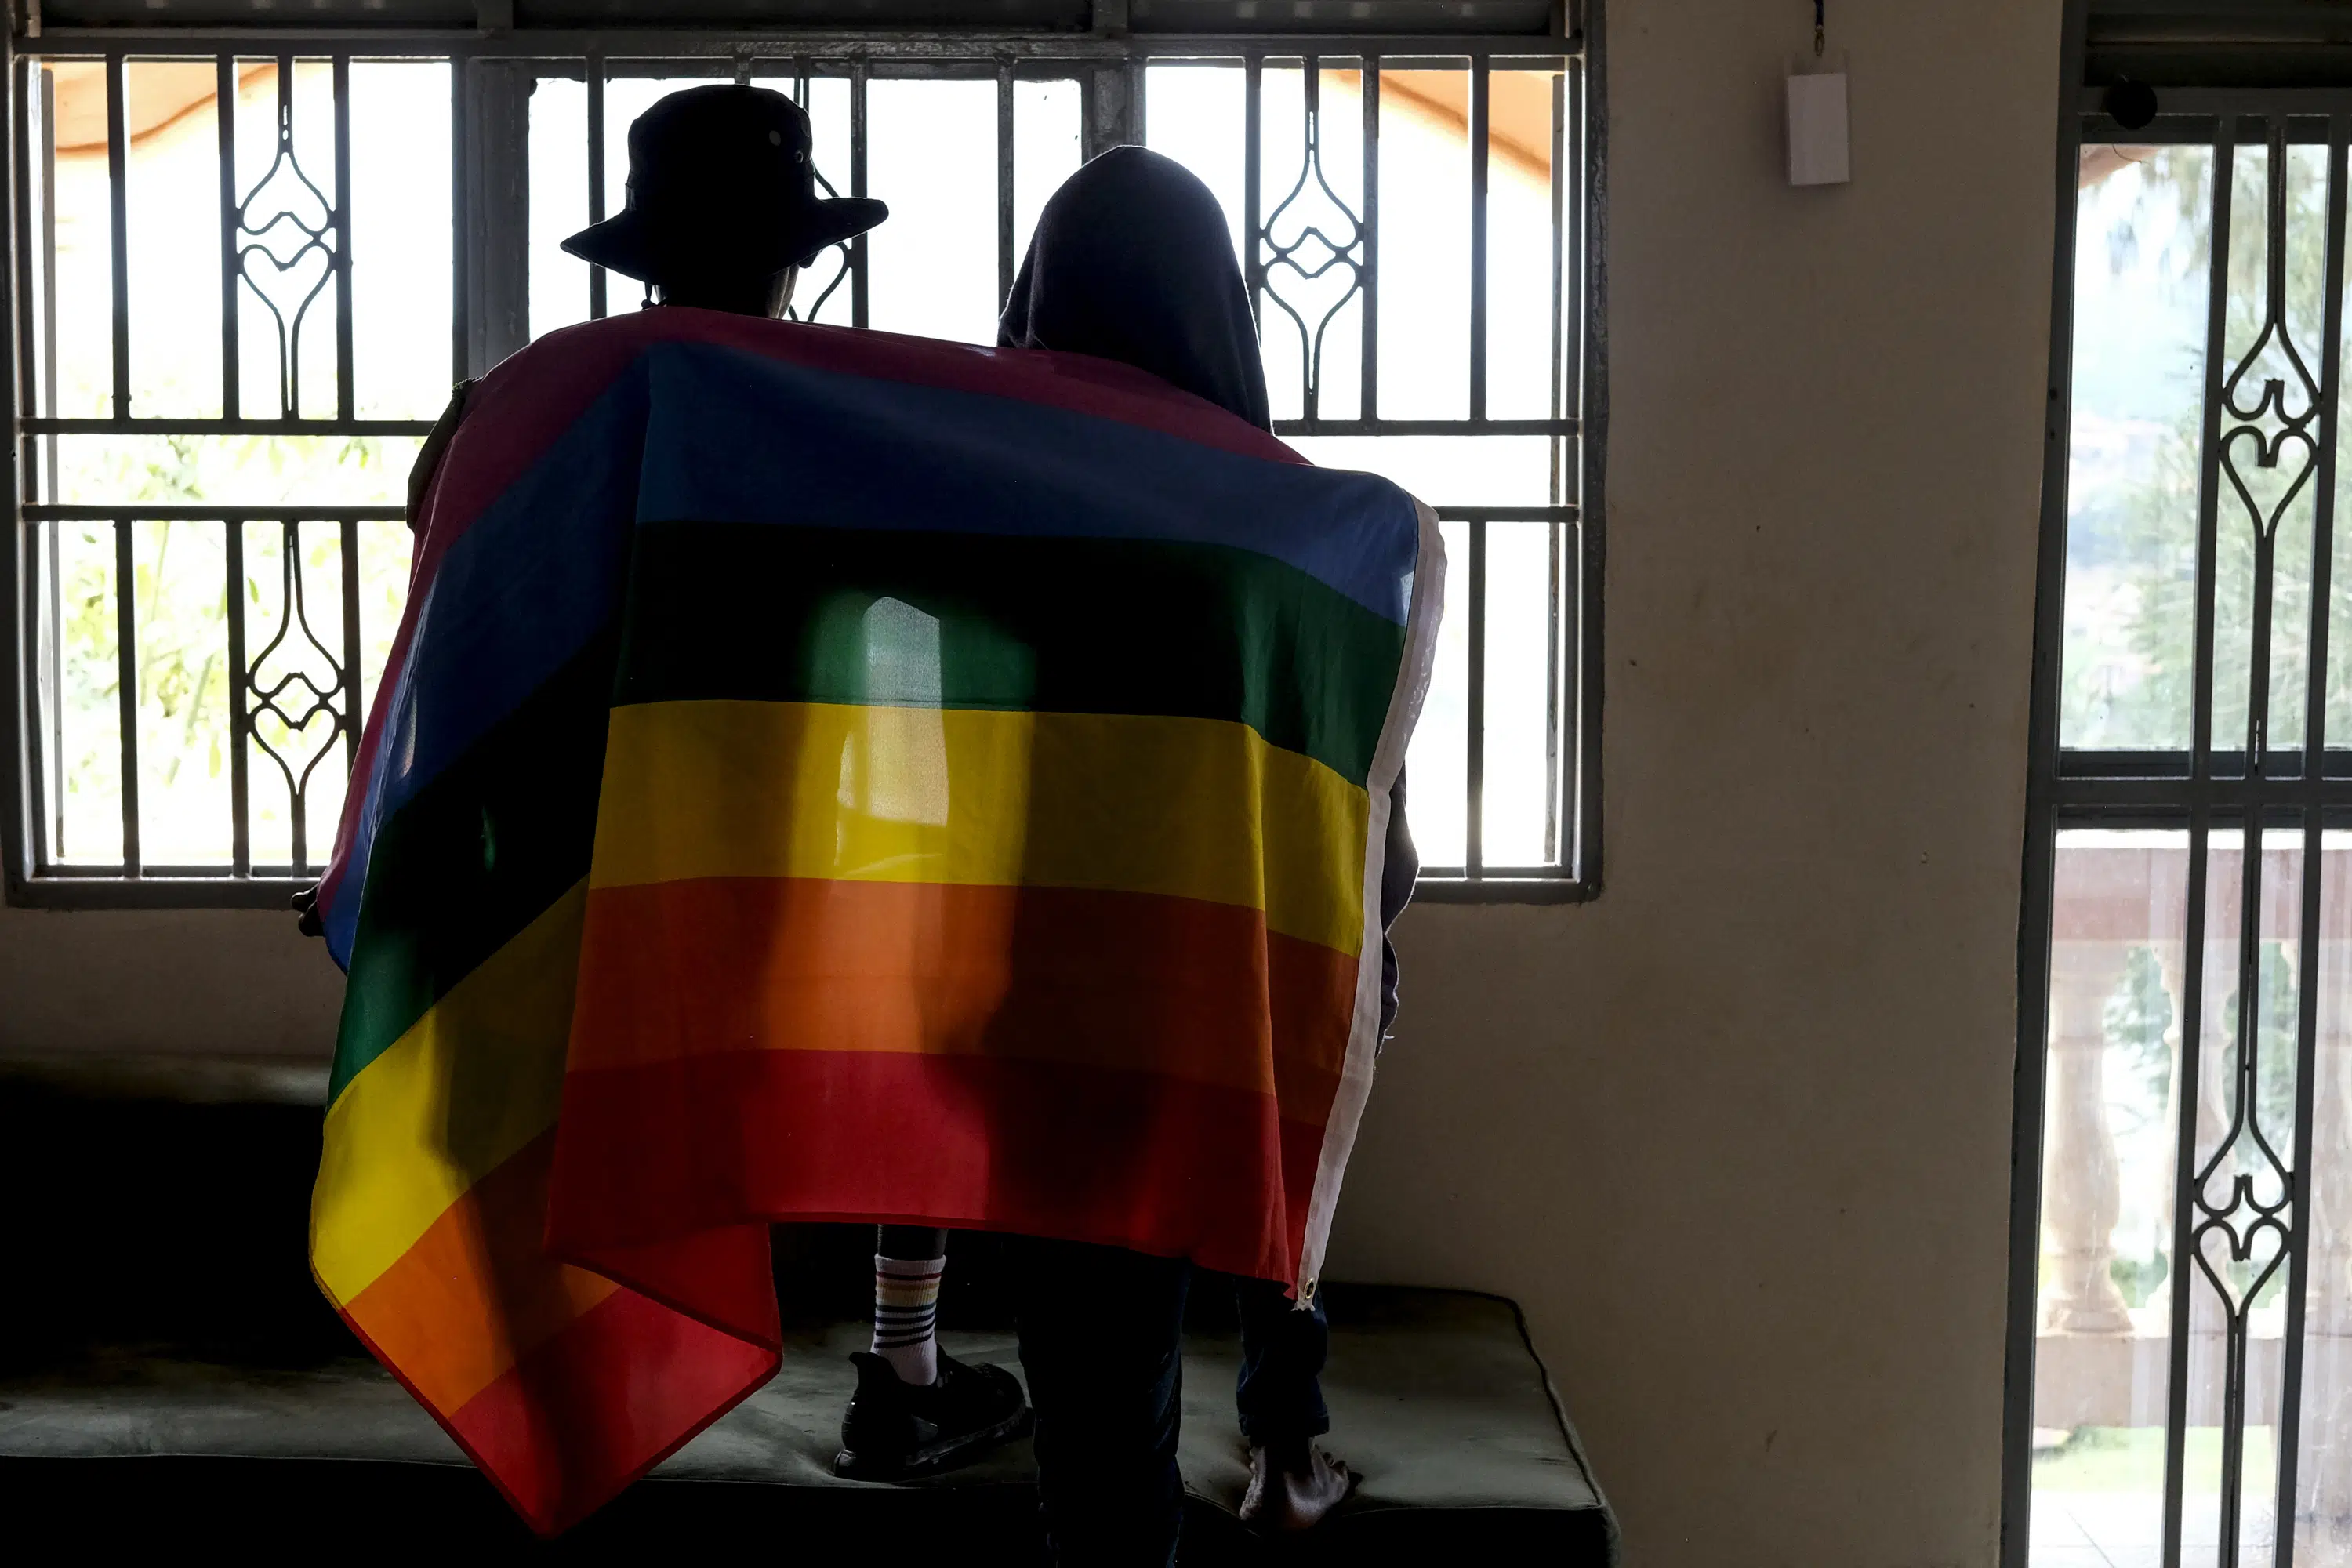 Uganda imposes death penalty for ‘aggravated homosexuality’…